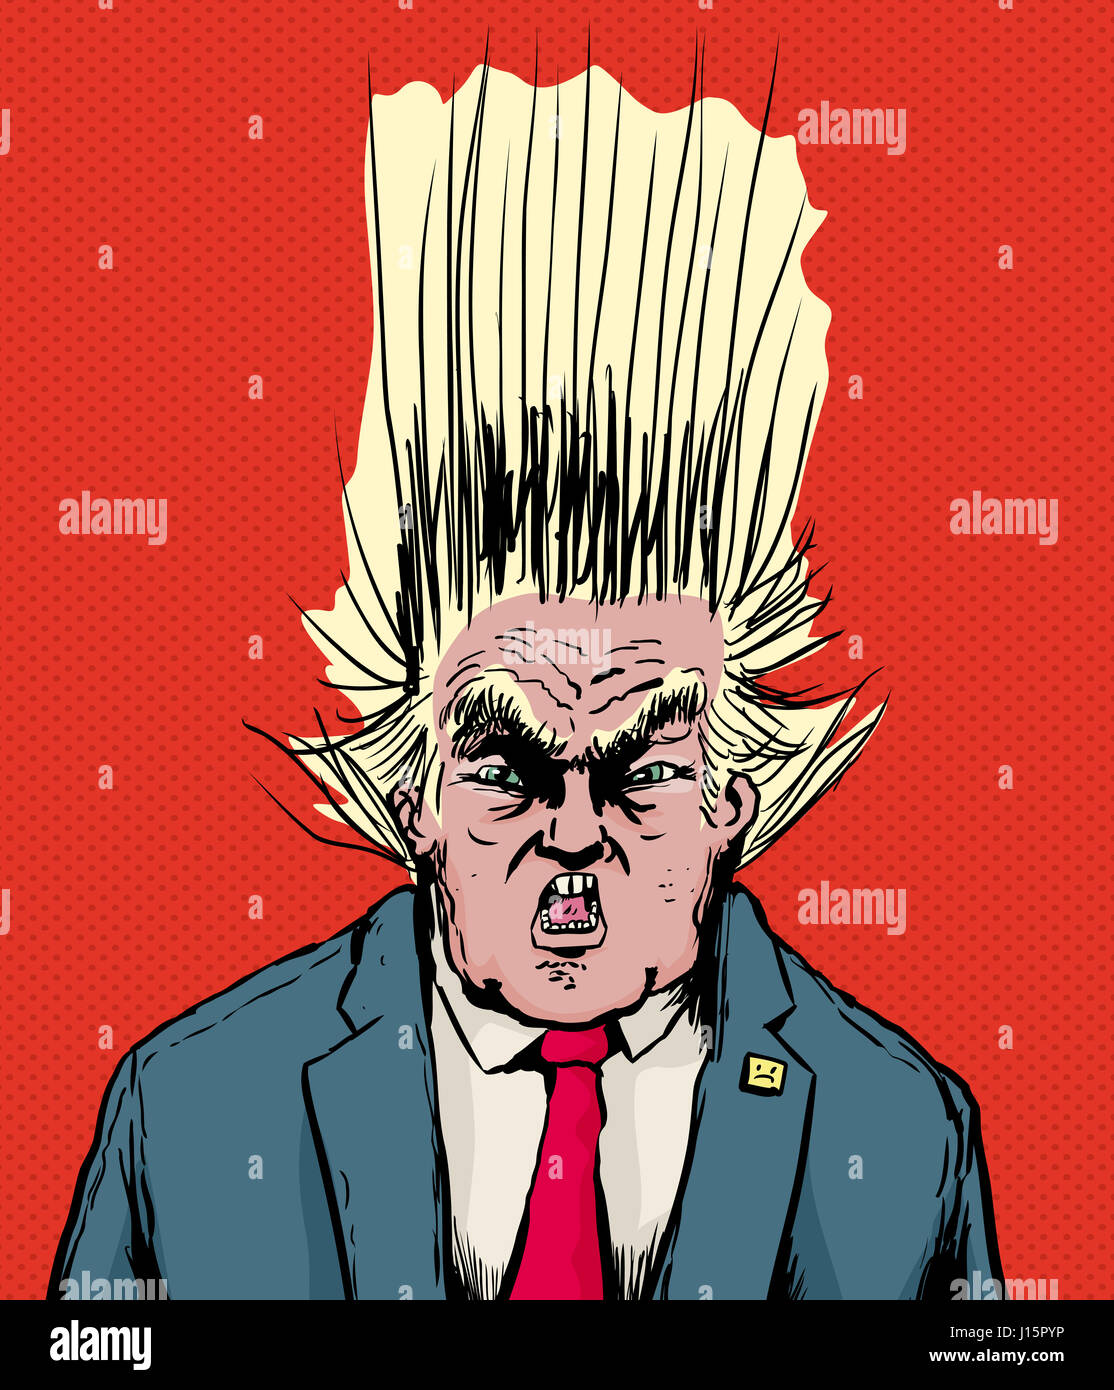 April 18, 2017. Caricature of Donald Trump with hair standing up while he screams Stock Photo